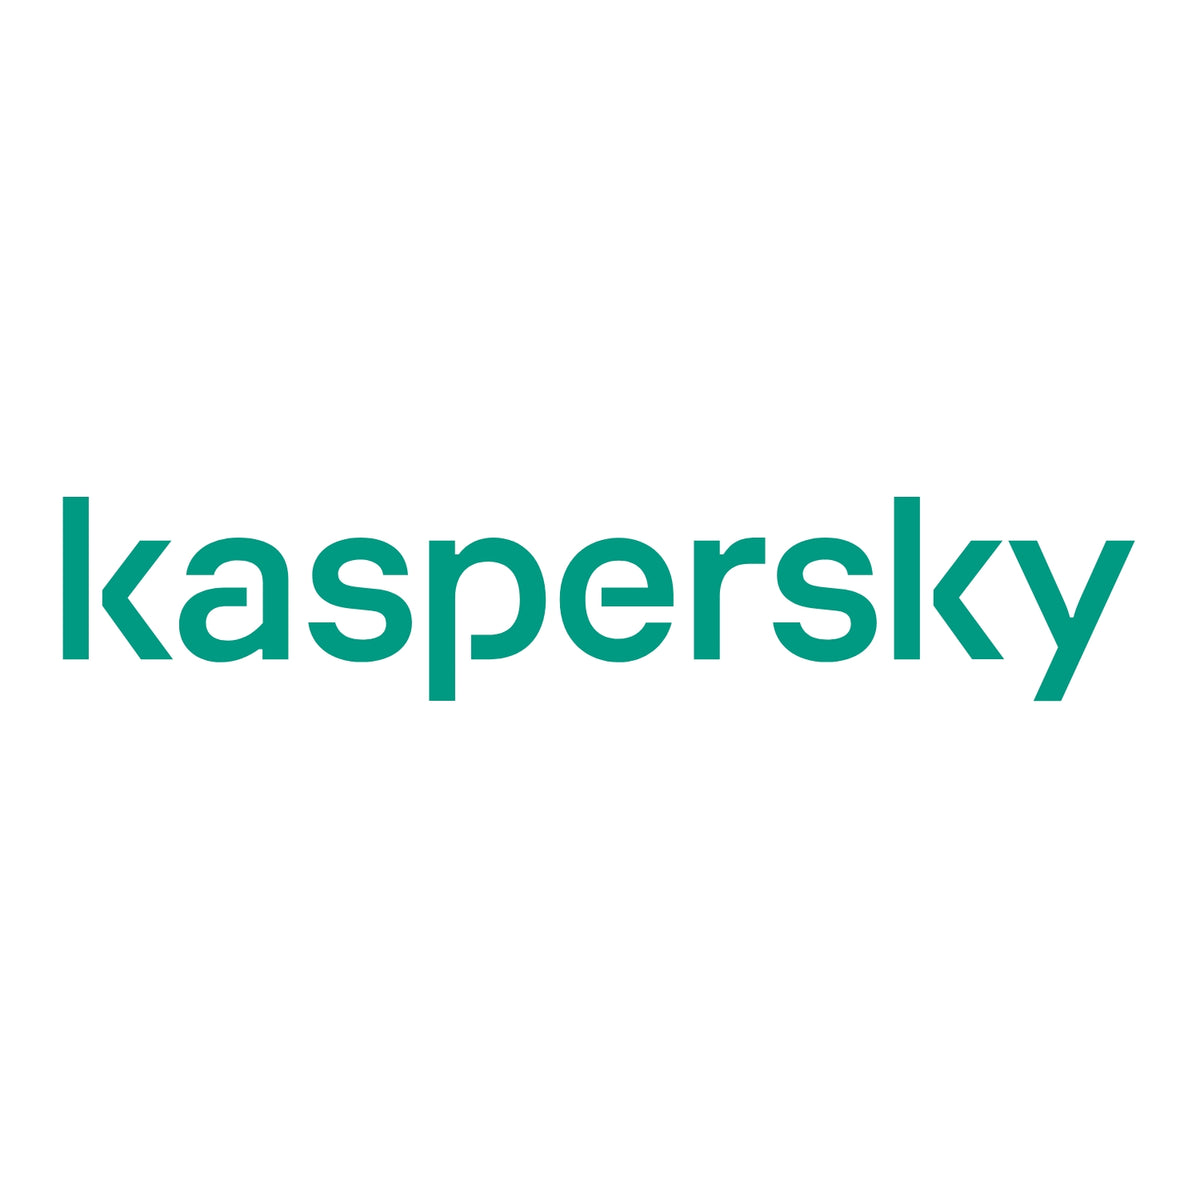 Kaspersky - Cybersecurity for Home and Business